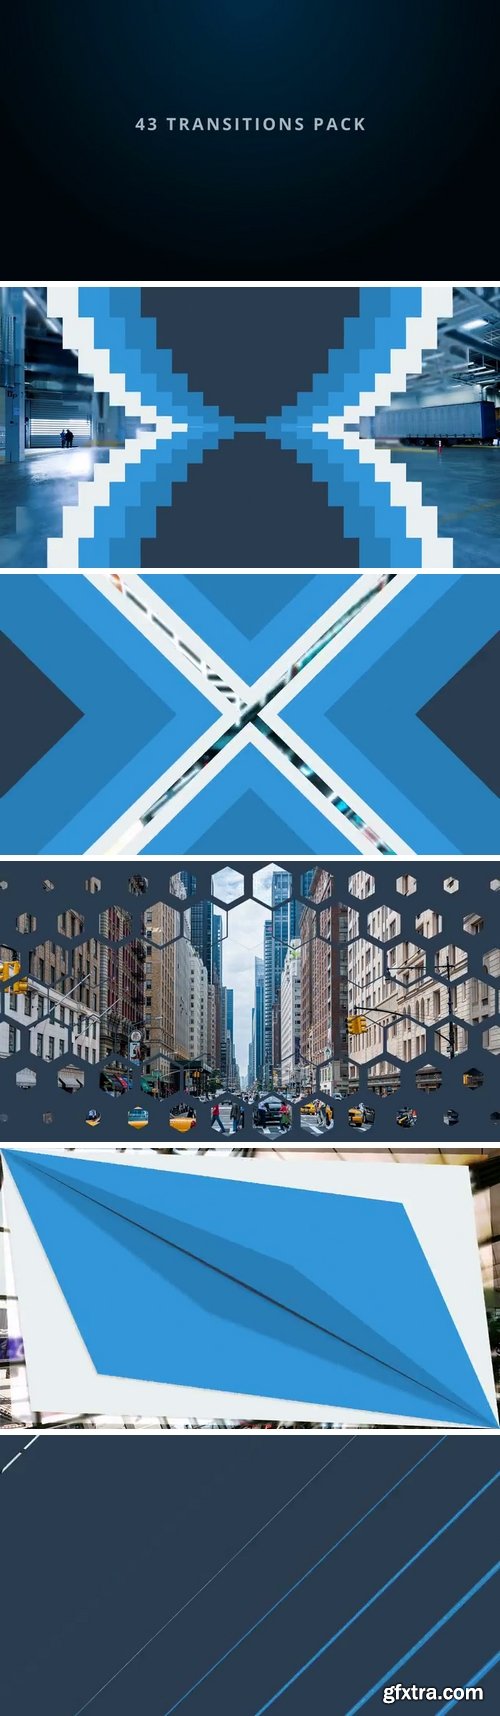 MA - 43 Transitions Pack After Effects Templates 59763